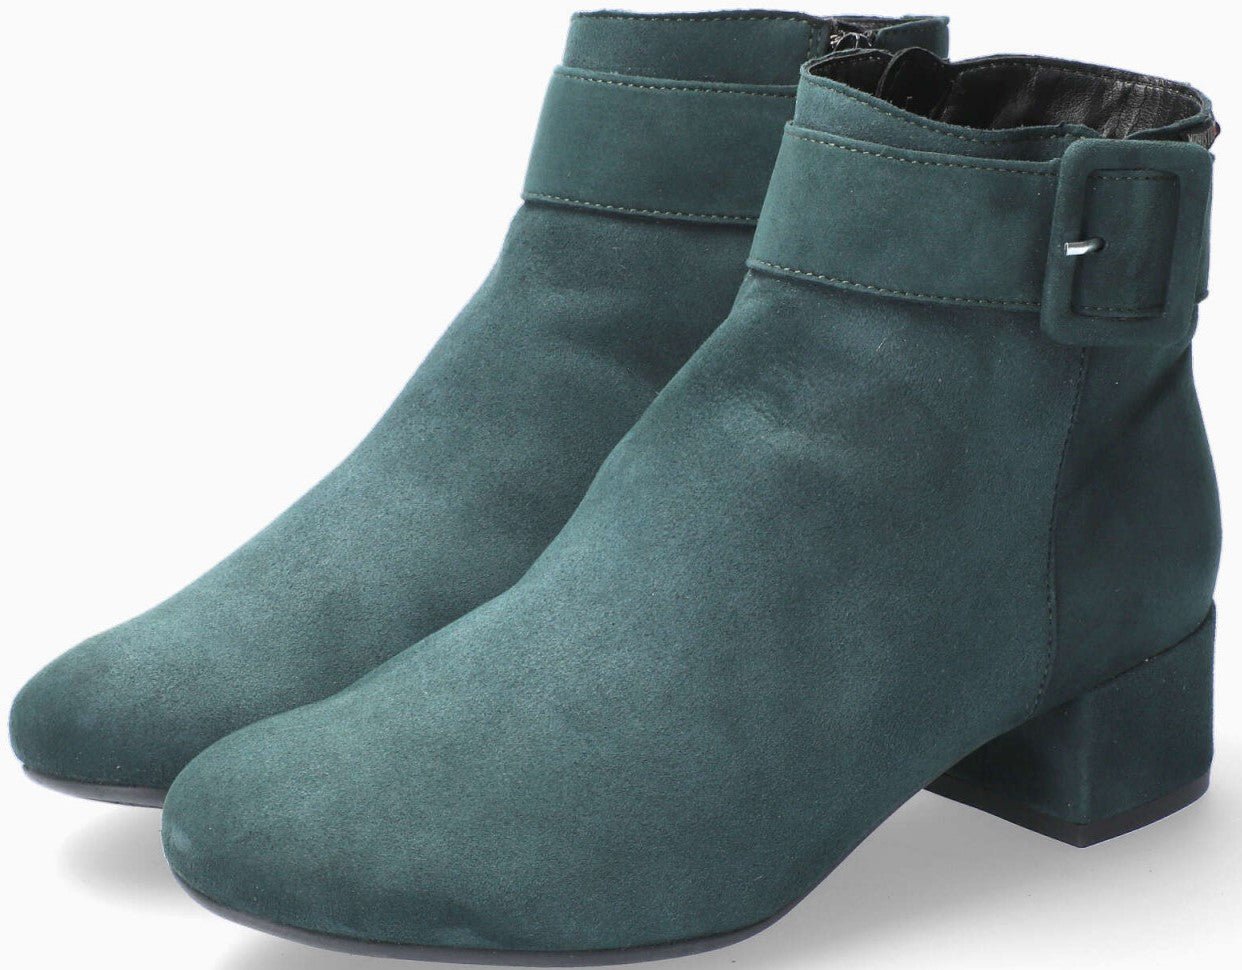 Mephisto Balina Women Ankle Boot Suede - Forest Green - ChaplinshoesMephisto Balina Women Ankle Boot Suede - Forest GreenMephisto